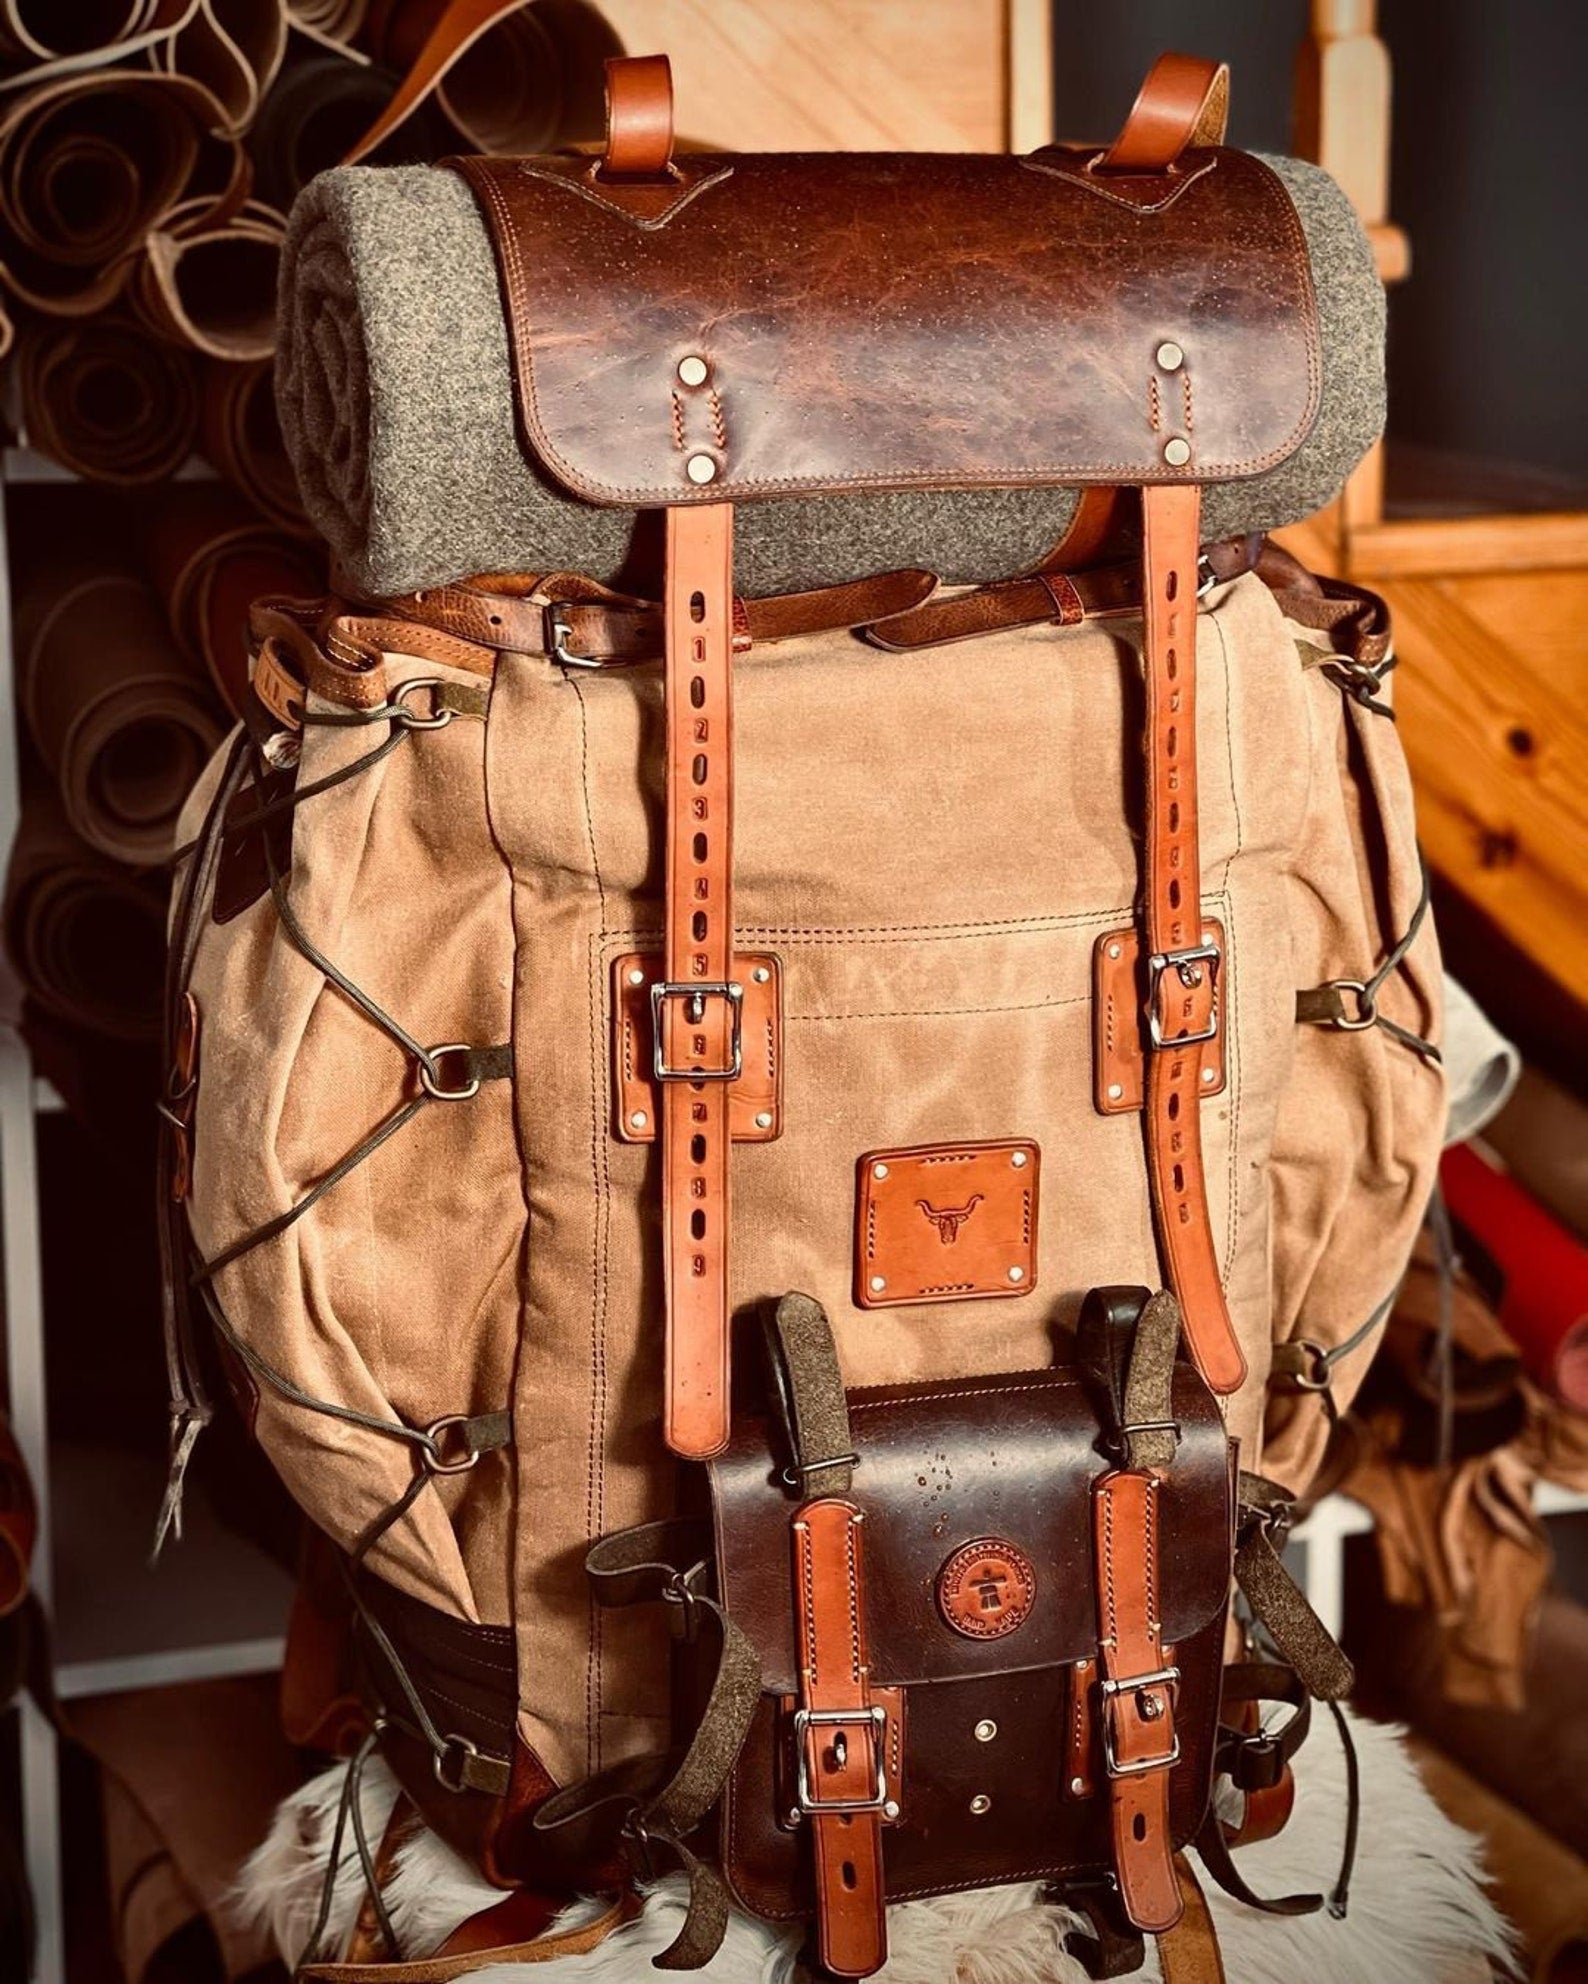 Camping Backpack | Camping Backpacks | Brown Backpack | Bushcraft  Design Awards | 45 L | Handmade Leather, Waxed Backpack for Travel, Camping, Hunting, Hiking | Personalization bushcraft - camping - hiking backpack 99percenthandmade   